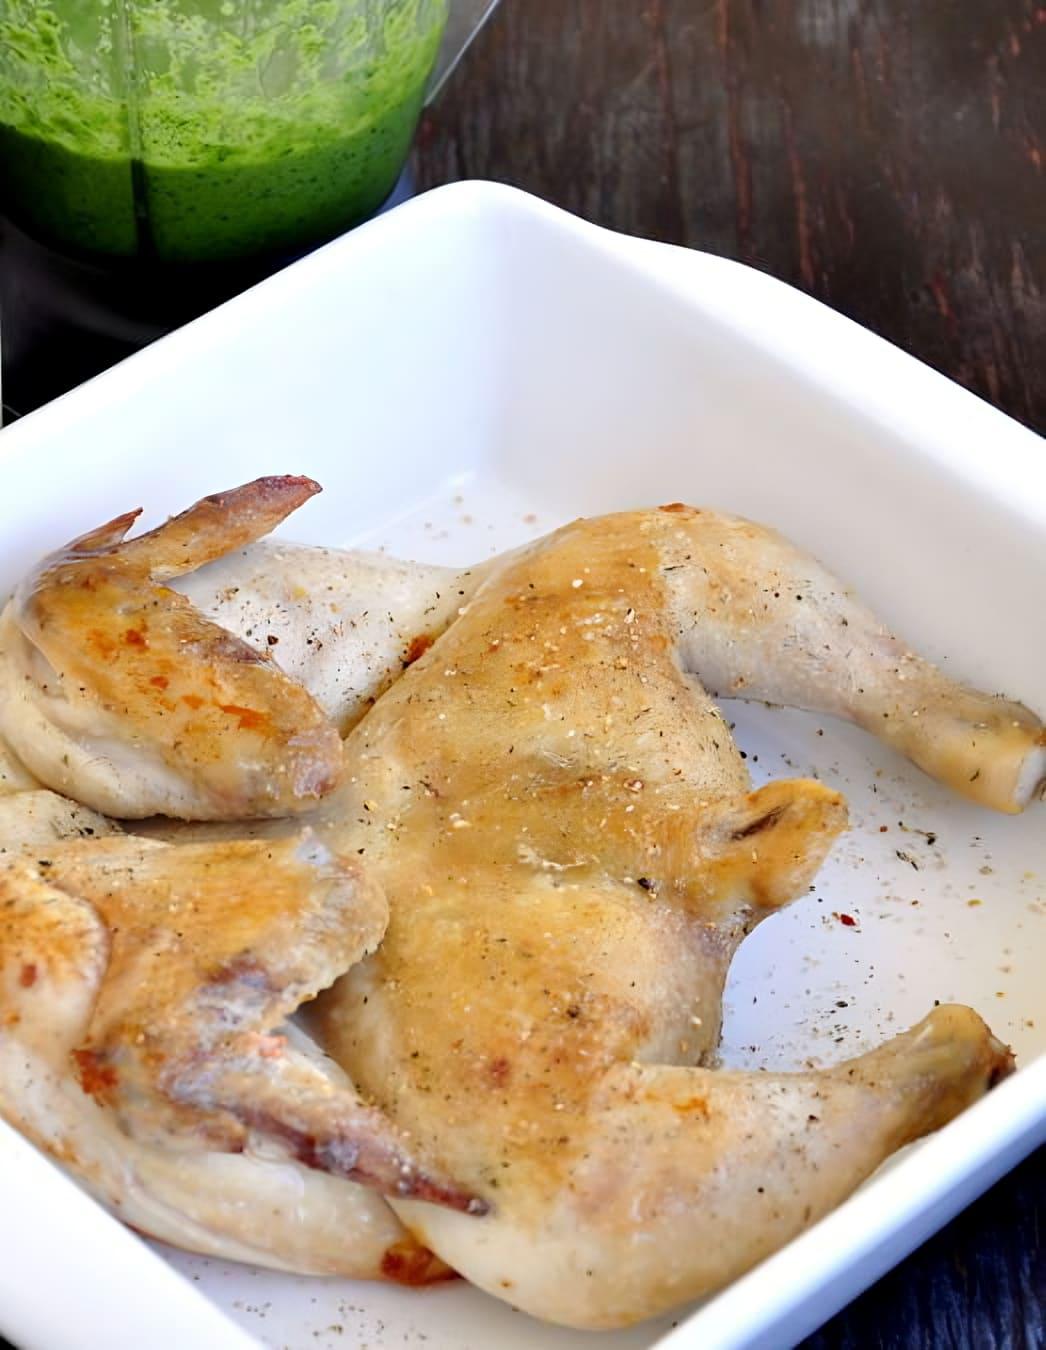 Chicken baked in aromatic green sauce with plums